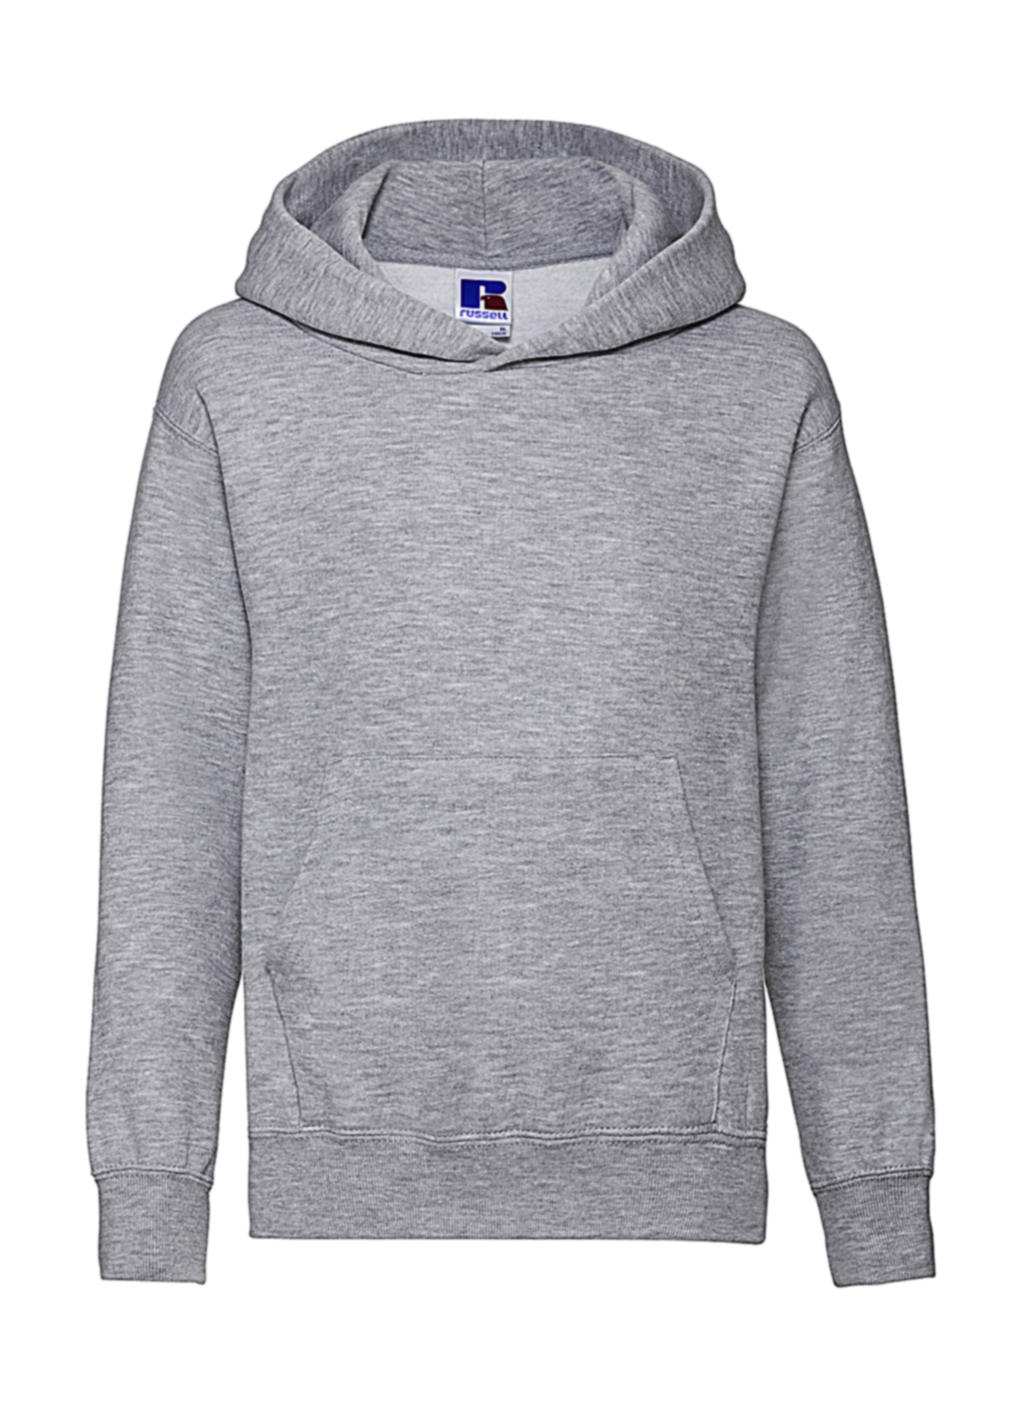  Kids Hooded Sweat in Farbe Light Oxford